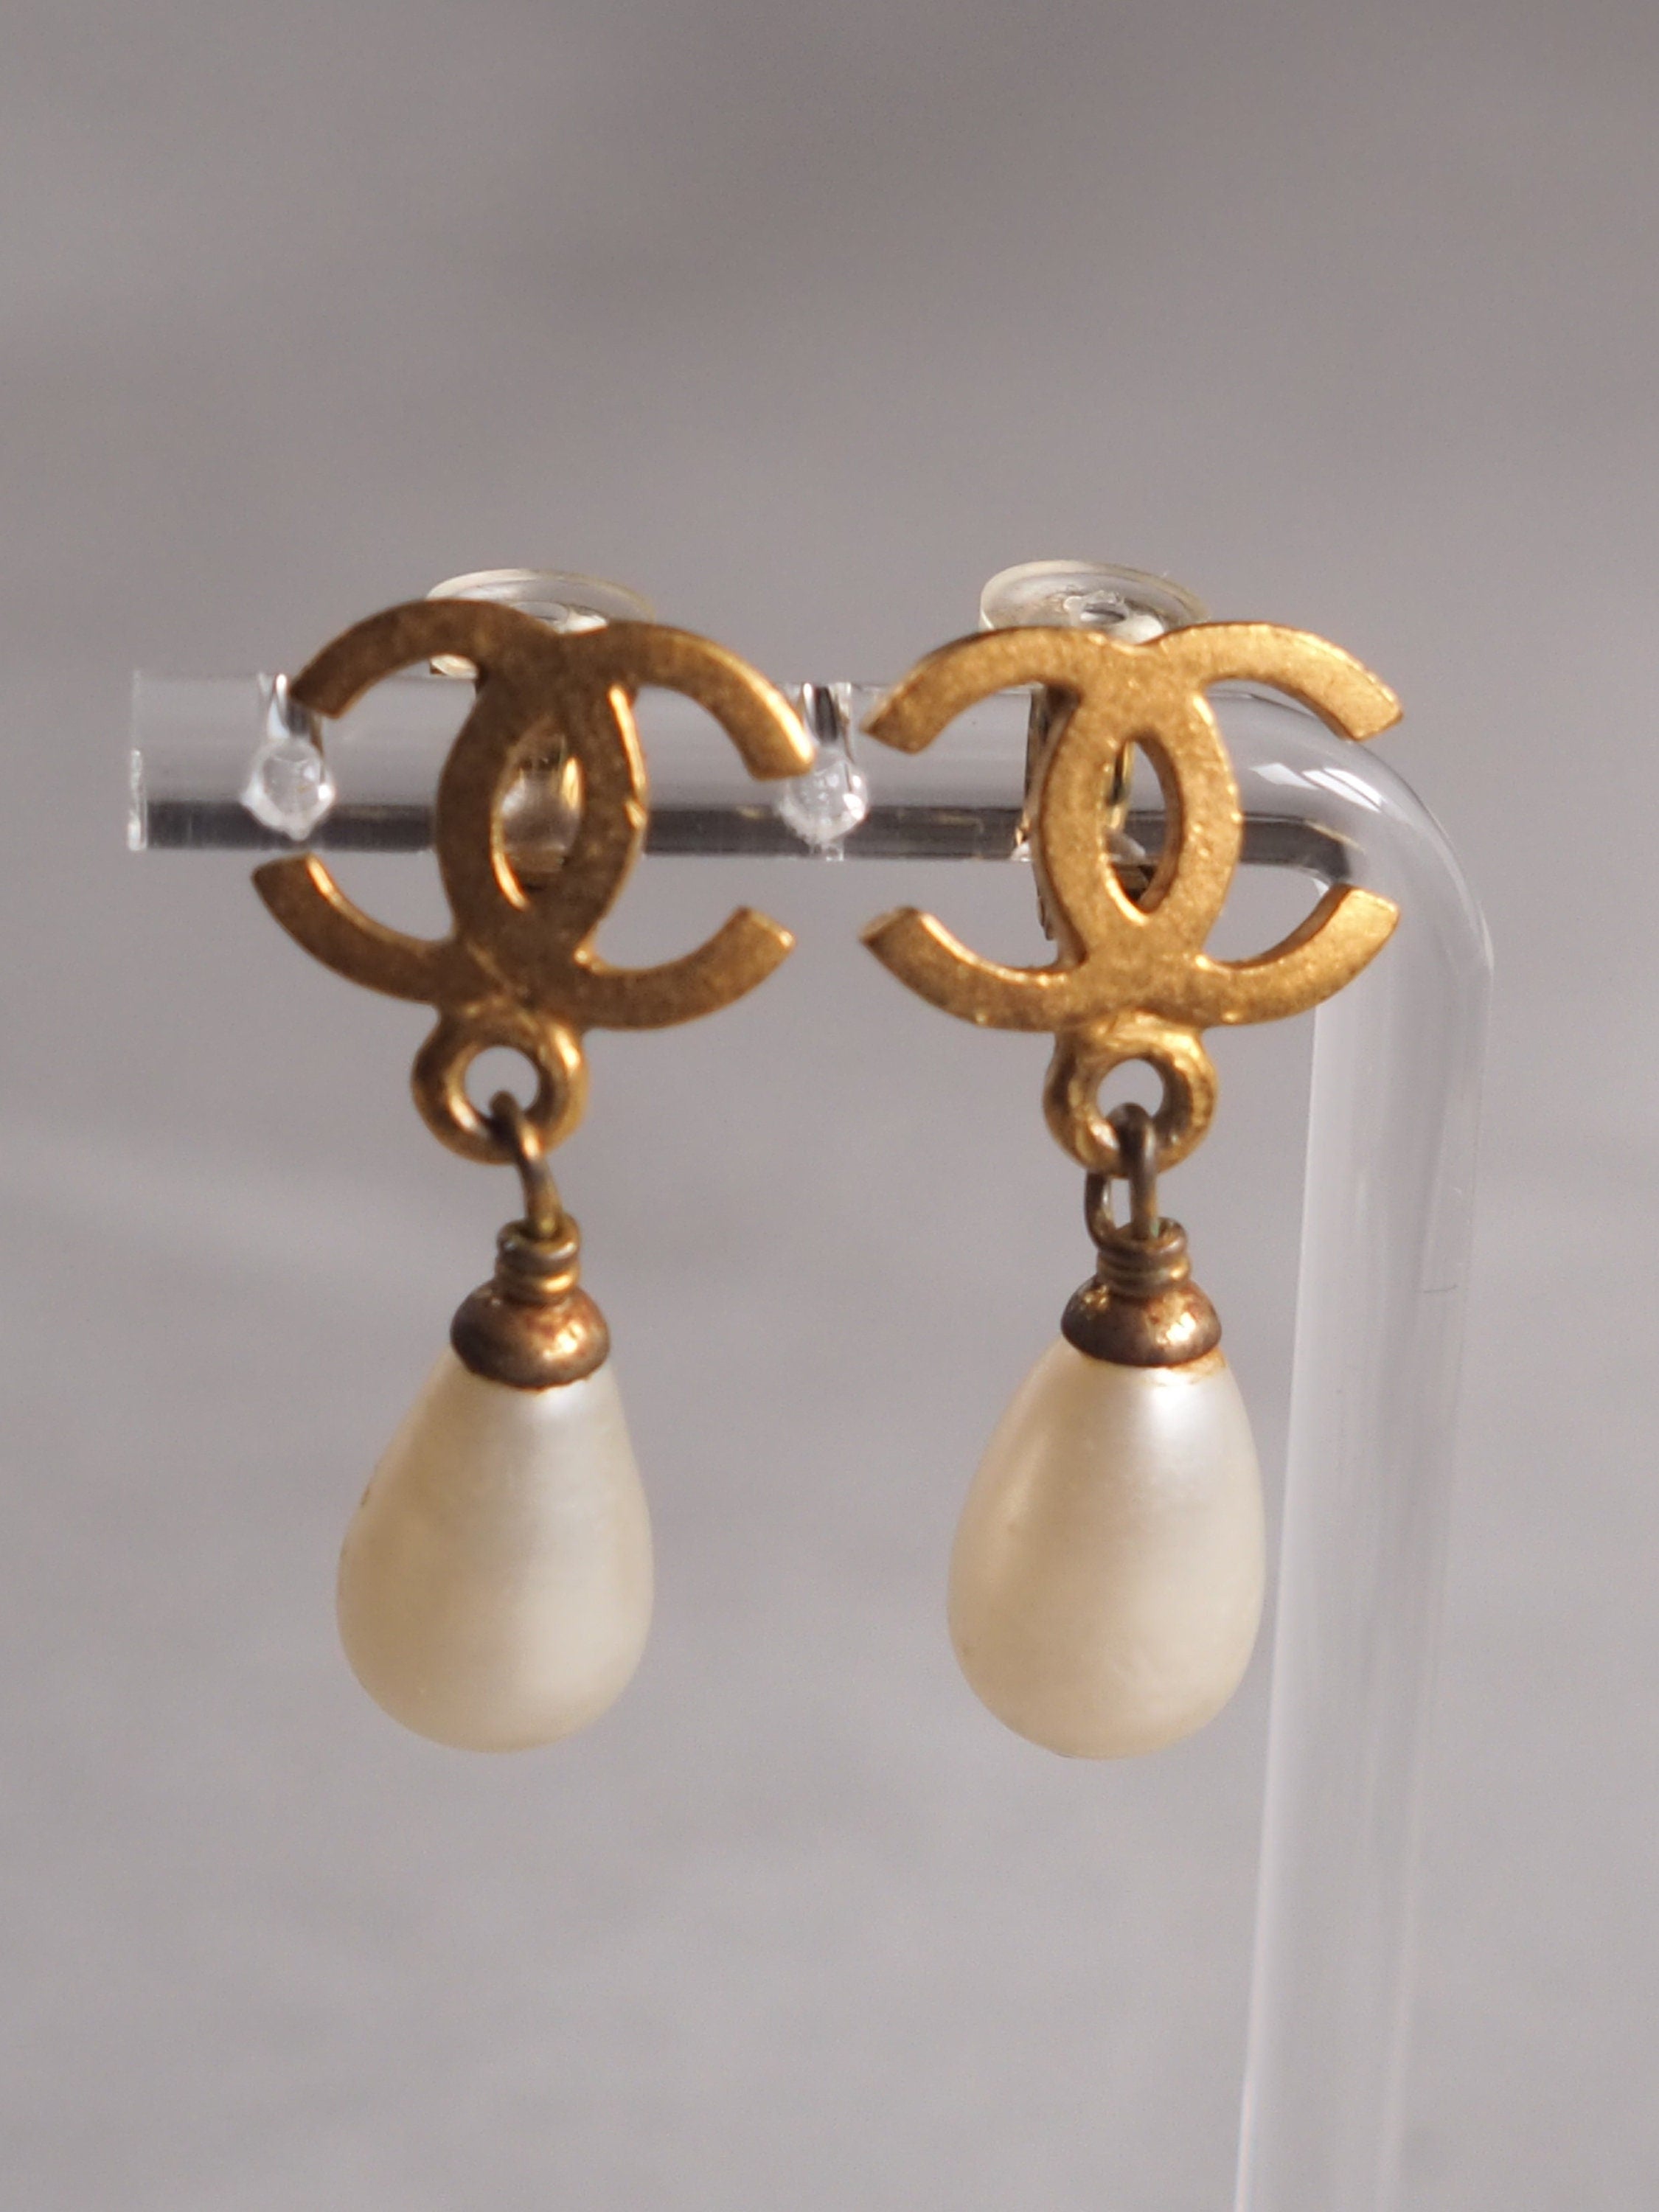 CHANEL Vintage Earrings Coco Mark Perl Drop Gold Plated Authentic